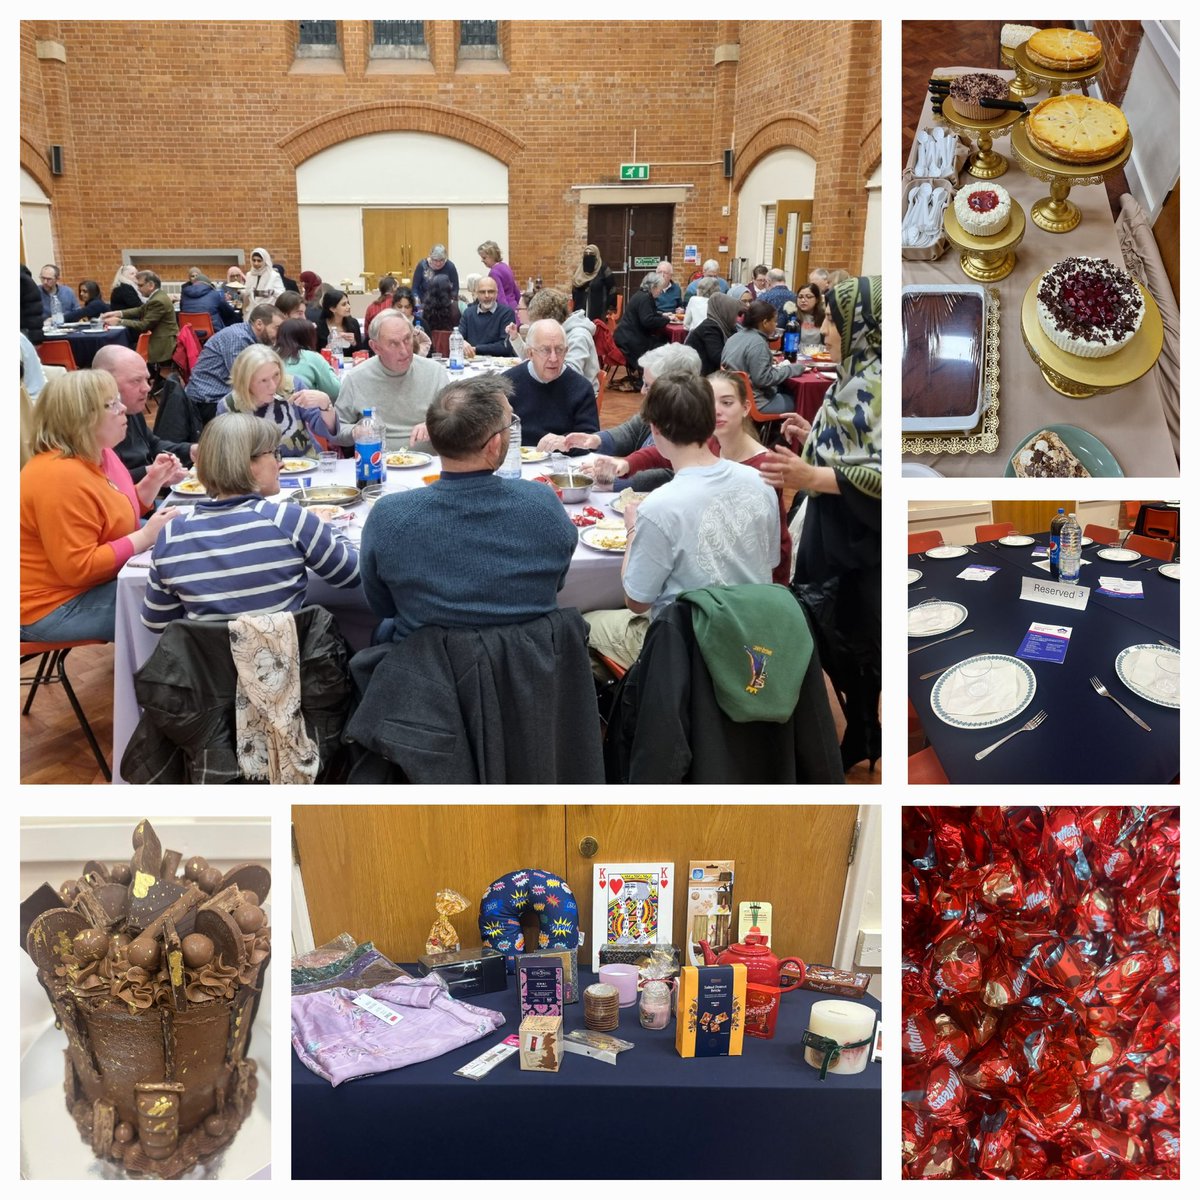 Our Curry & Quiz night was a huge success, raising over £3,500 Thank you to @rkhleicester @stphilipsleic CorporateArchitecture In-houseCatering, Drizul, Morelli's, Bondade,TinyBakery, BloomProject, ShabihaMaster, SaintMartinsLodge, farmuzz10, CandyCottonCakes, TropicanaFlorist